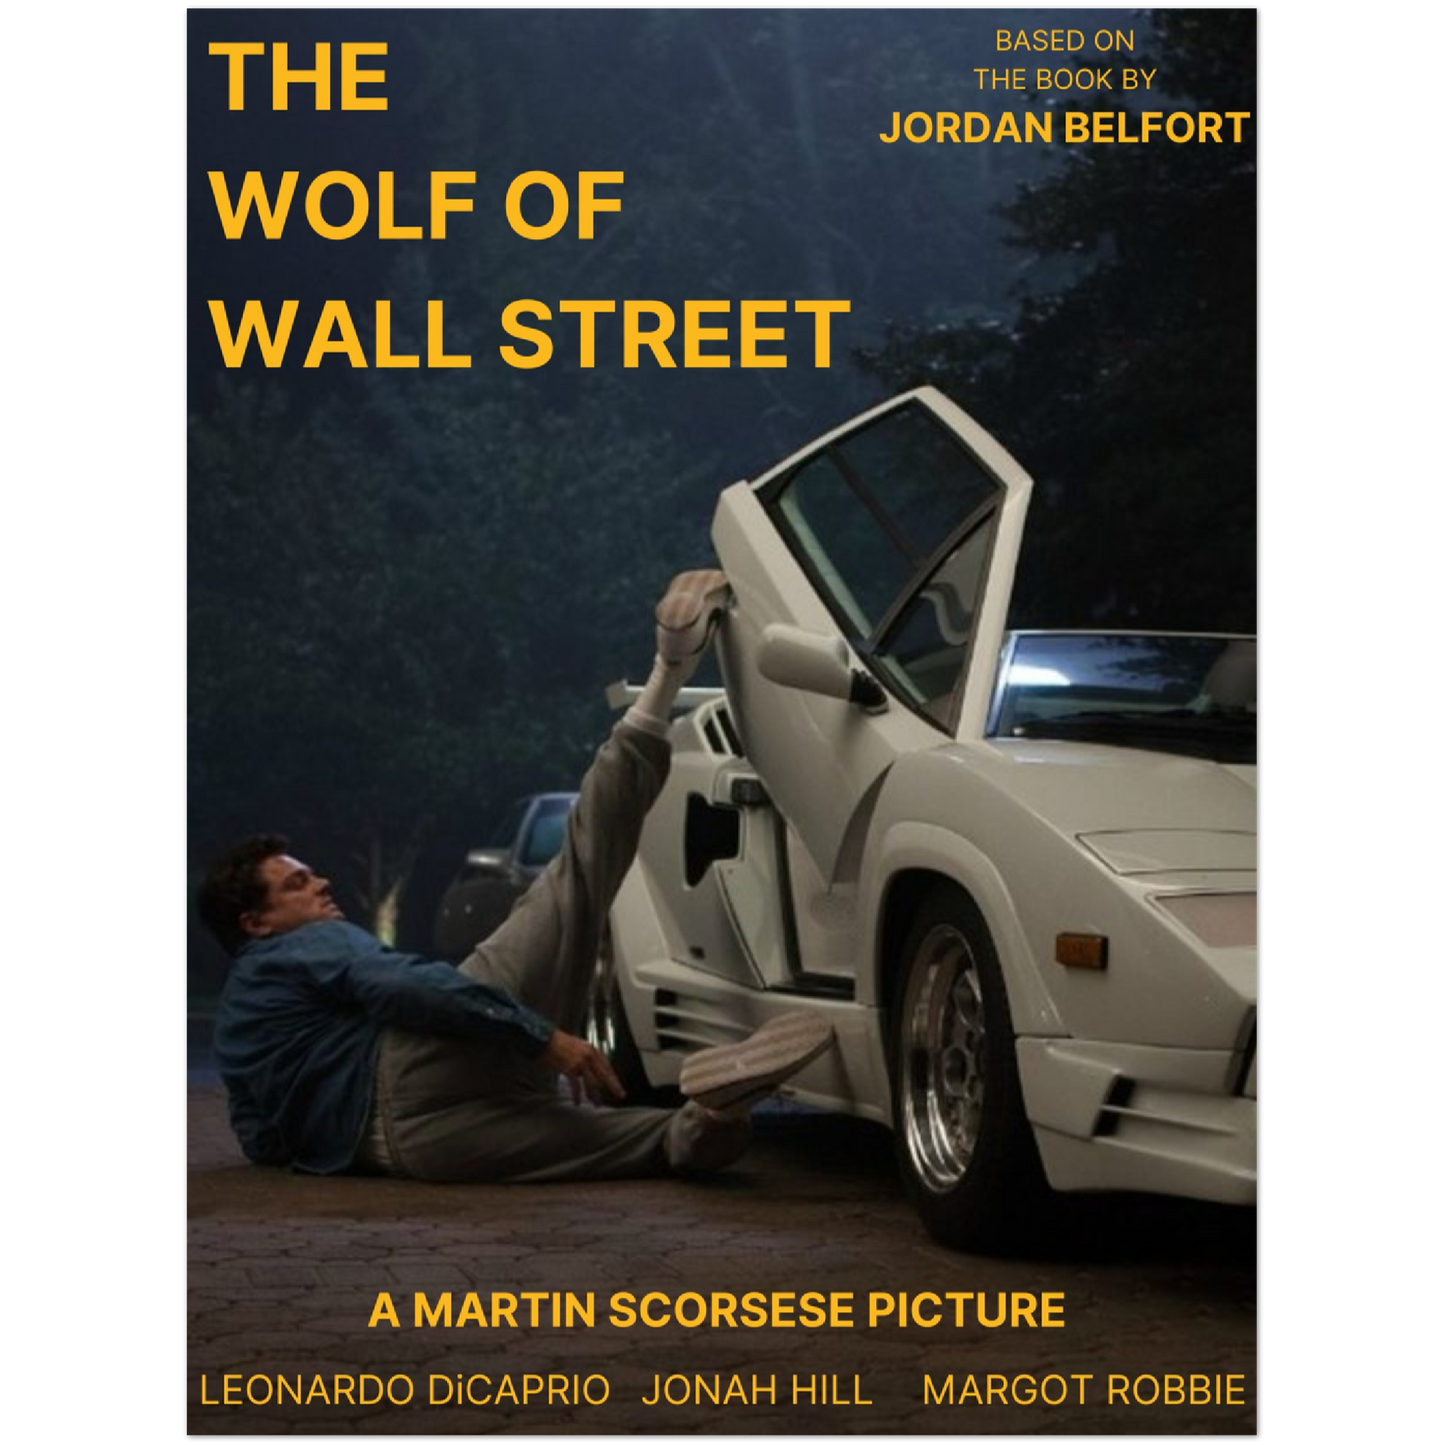 The Wolf Of Wall Street - Poster